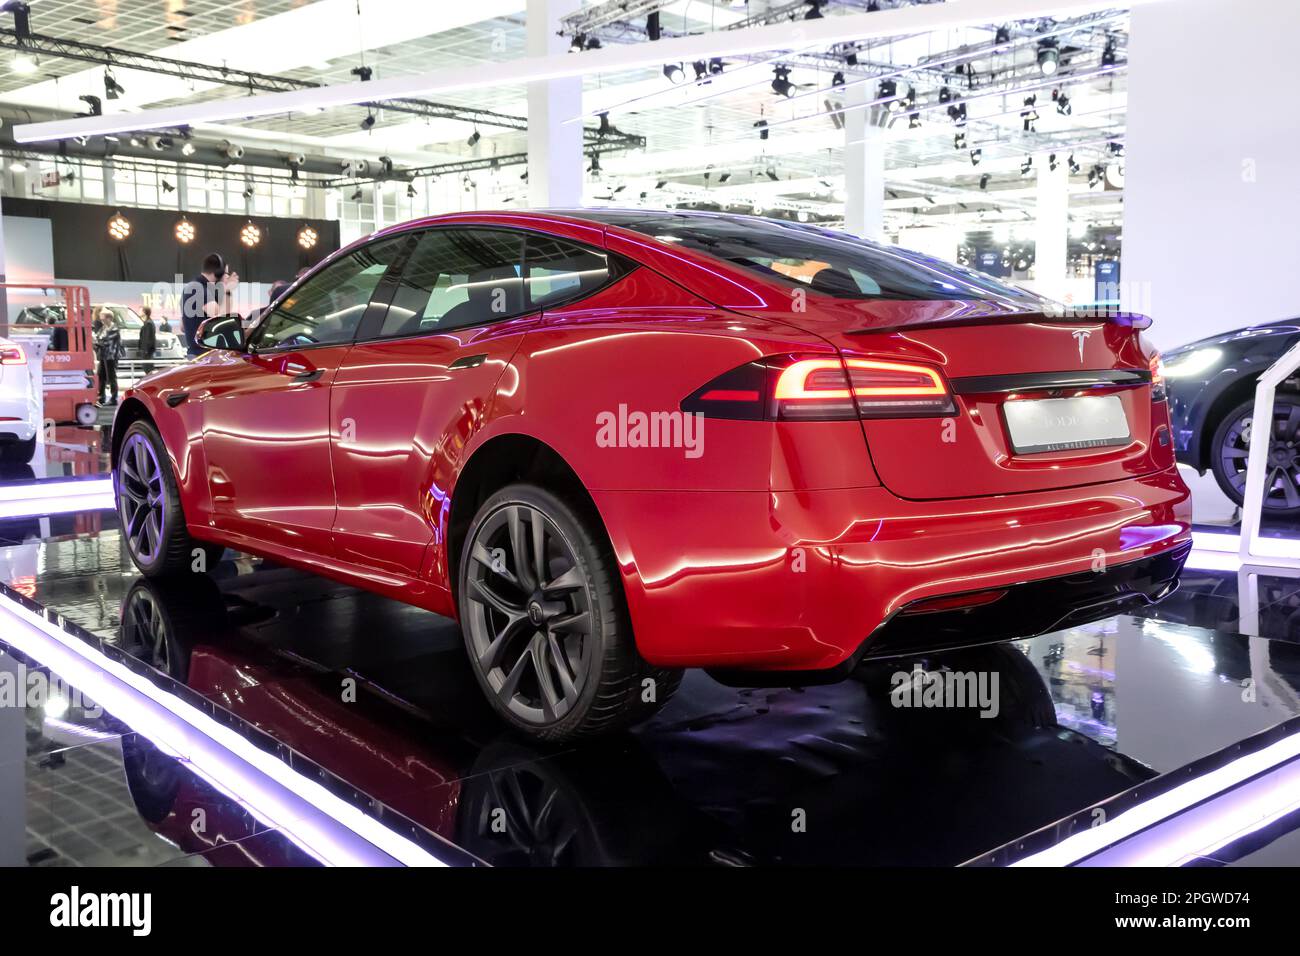 Tesla Model S electric car at the Brussels Autosalon European Motor Show. Brussels, Belgium - January 13, 2023. Stock Photo